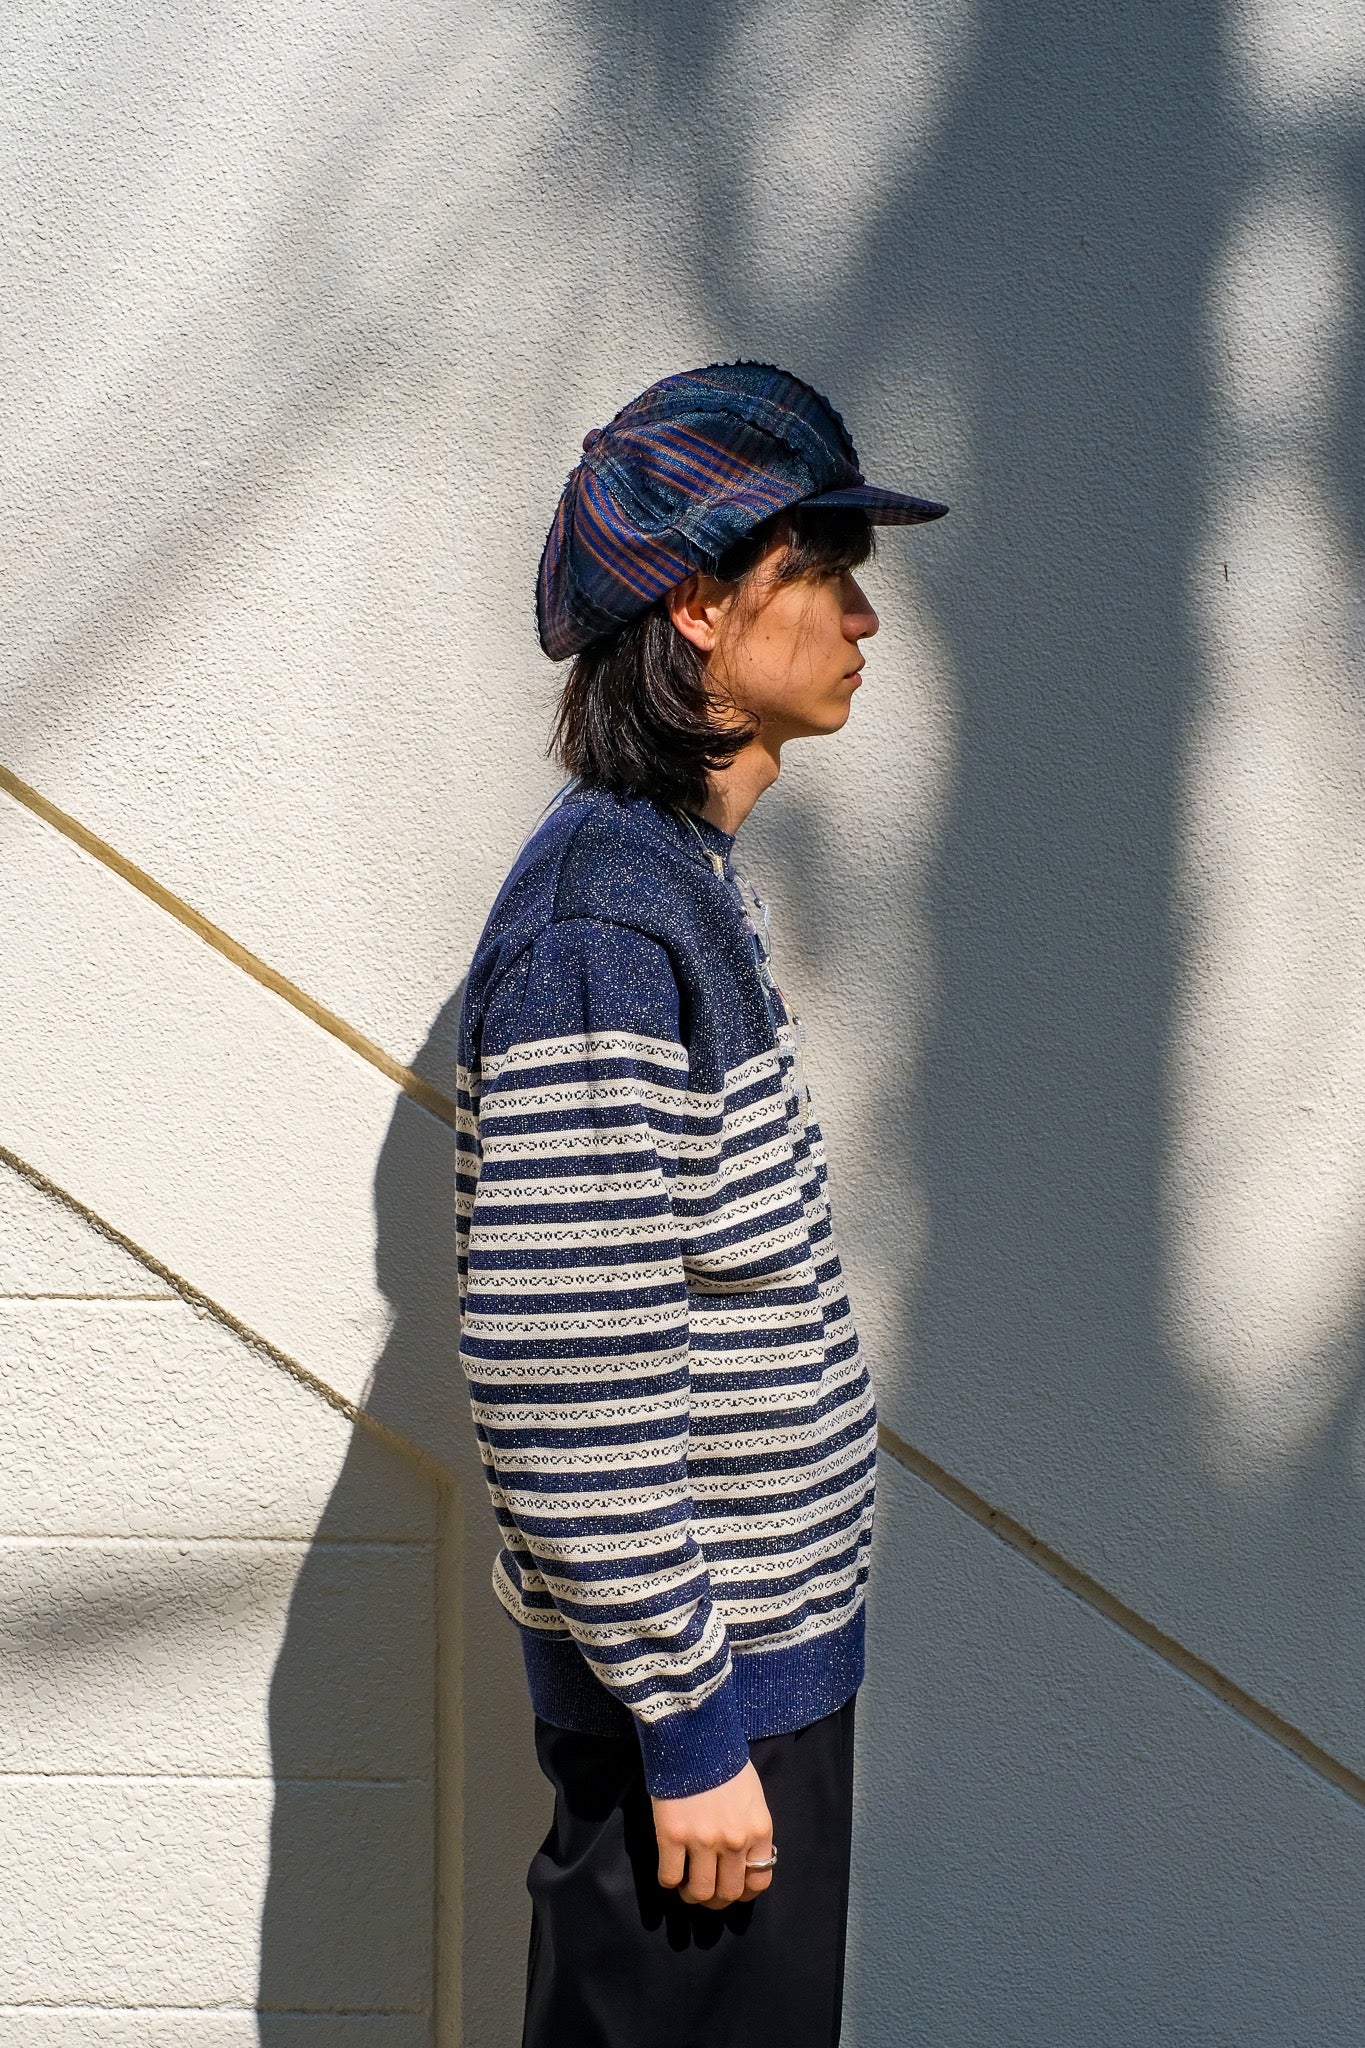 Image of wearing of SHINEBORDERKNIT of 22ss of Taigaigari